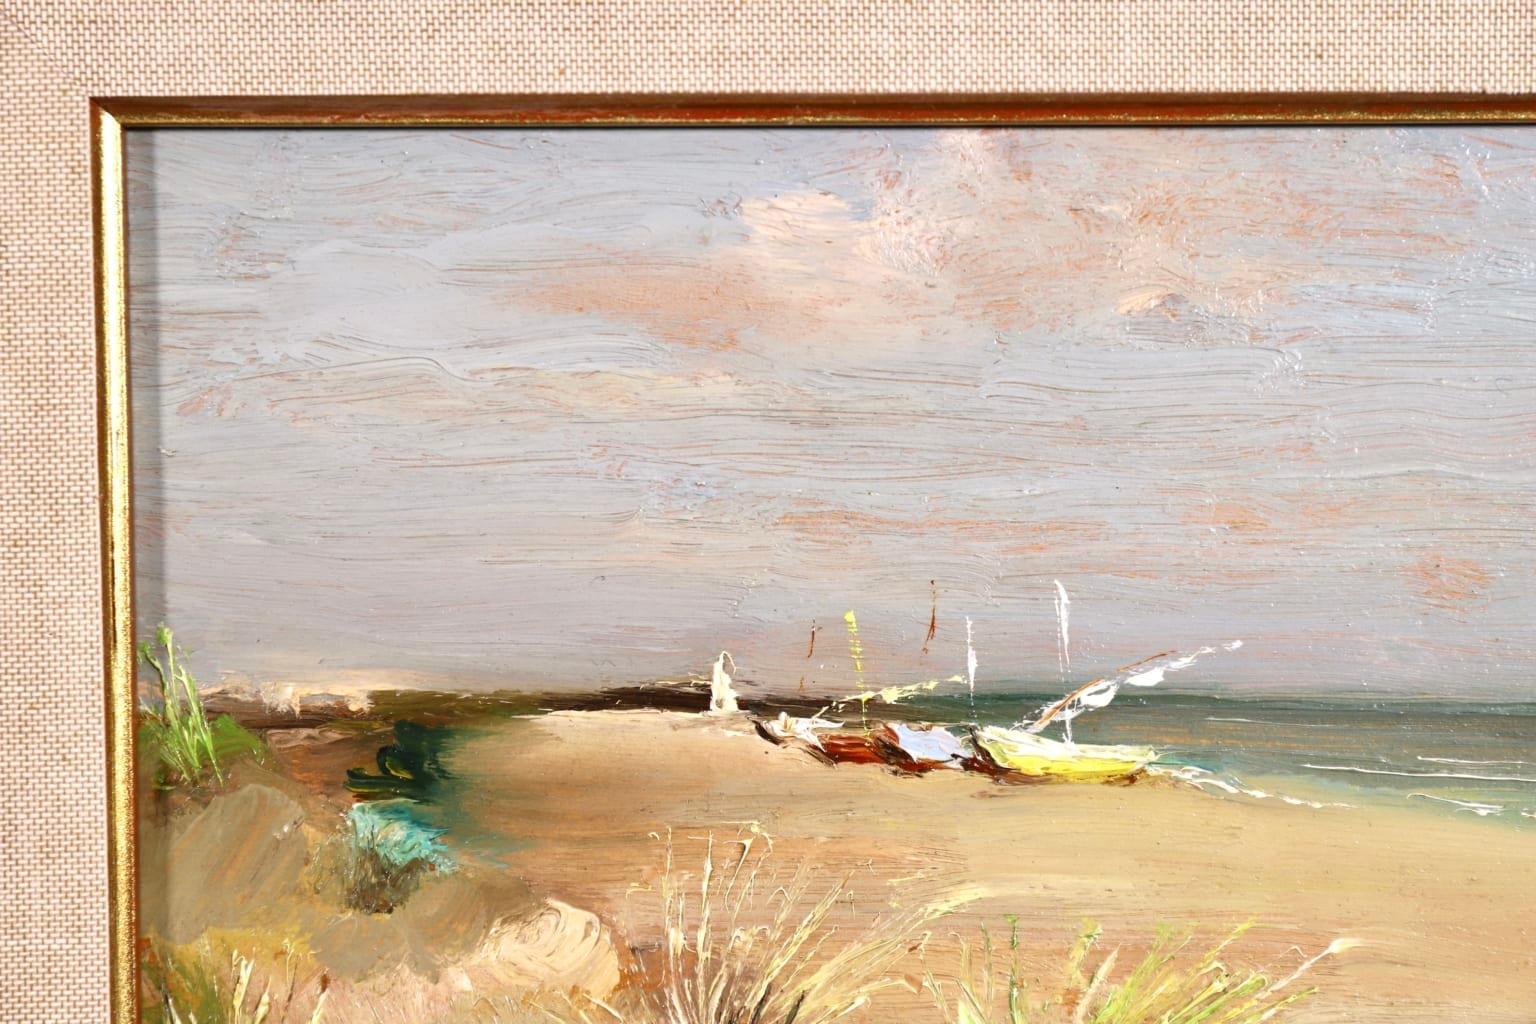 Sand Dunes at the Beach - Post Impressionist Oil, Sea Landscape by Marcel Dyf 1